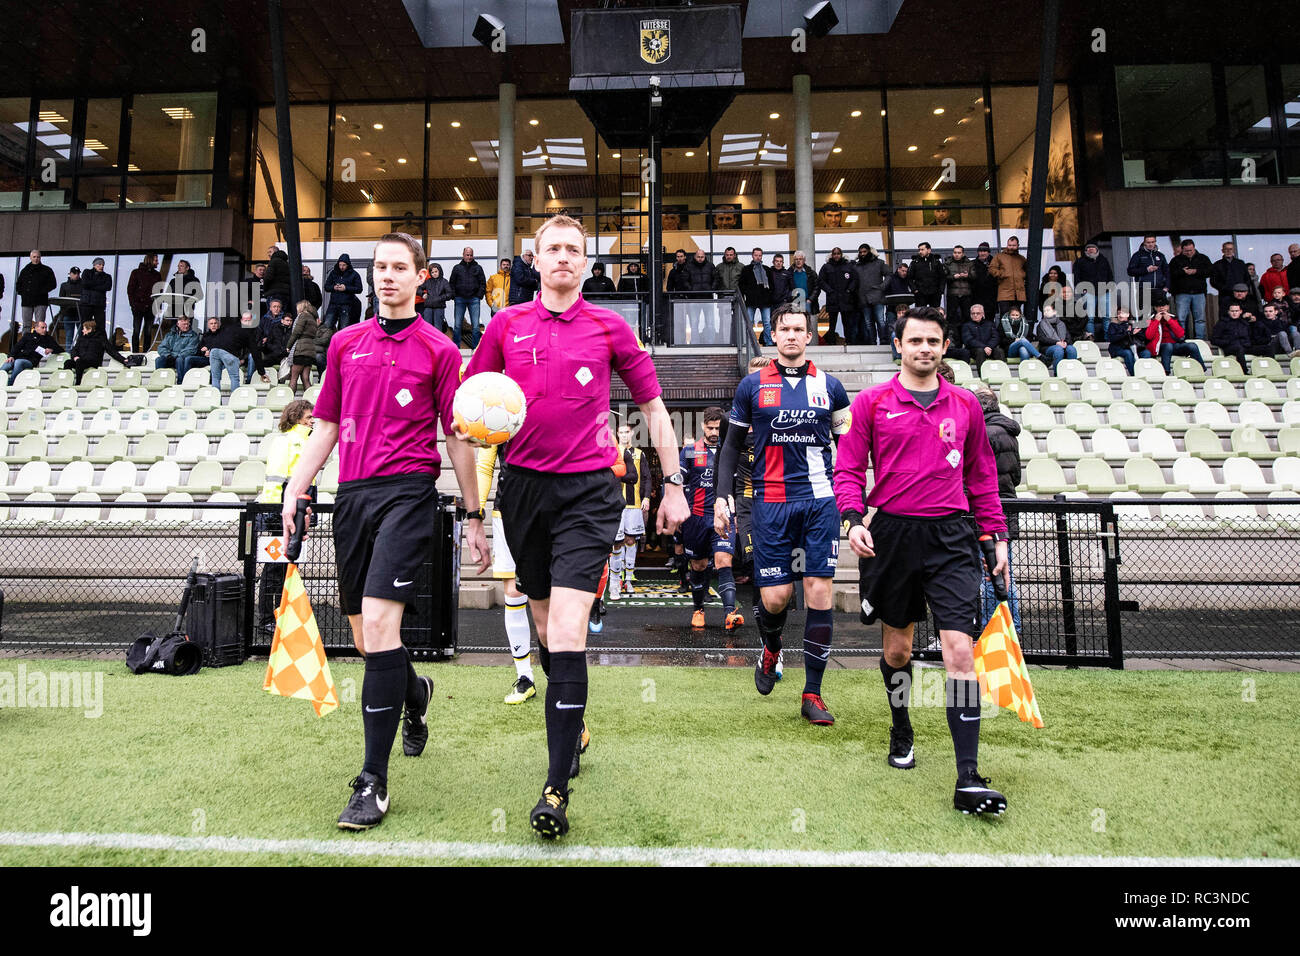 ARNHEM, 12-01-2019, Papendal, season 2018 / 2019, Dutch Tweede Divisie, referee F. De Winter with his assistant referees before the match Jong Vitesse - Excelsior Maassluis 1-3 Stock Photo